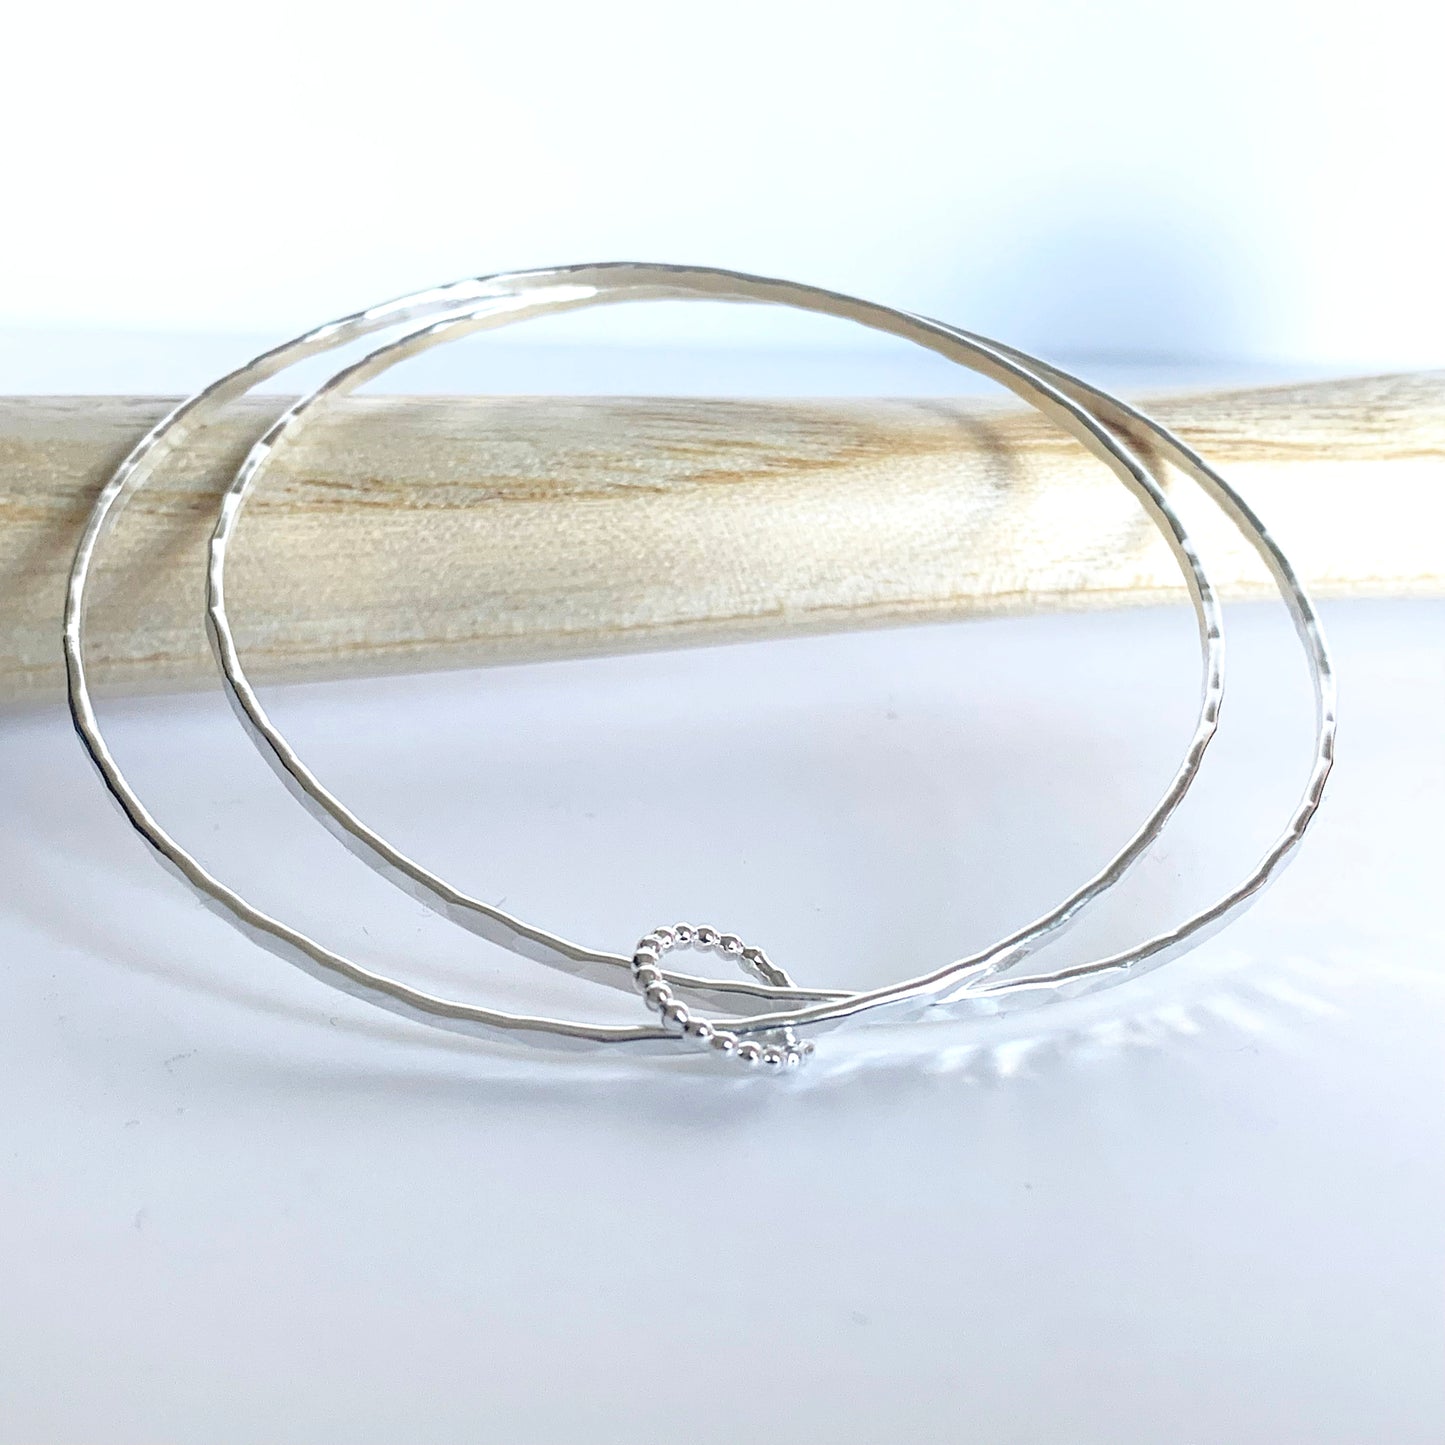 Double sterling silver bangle with beaded hoop